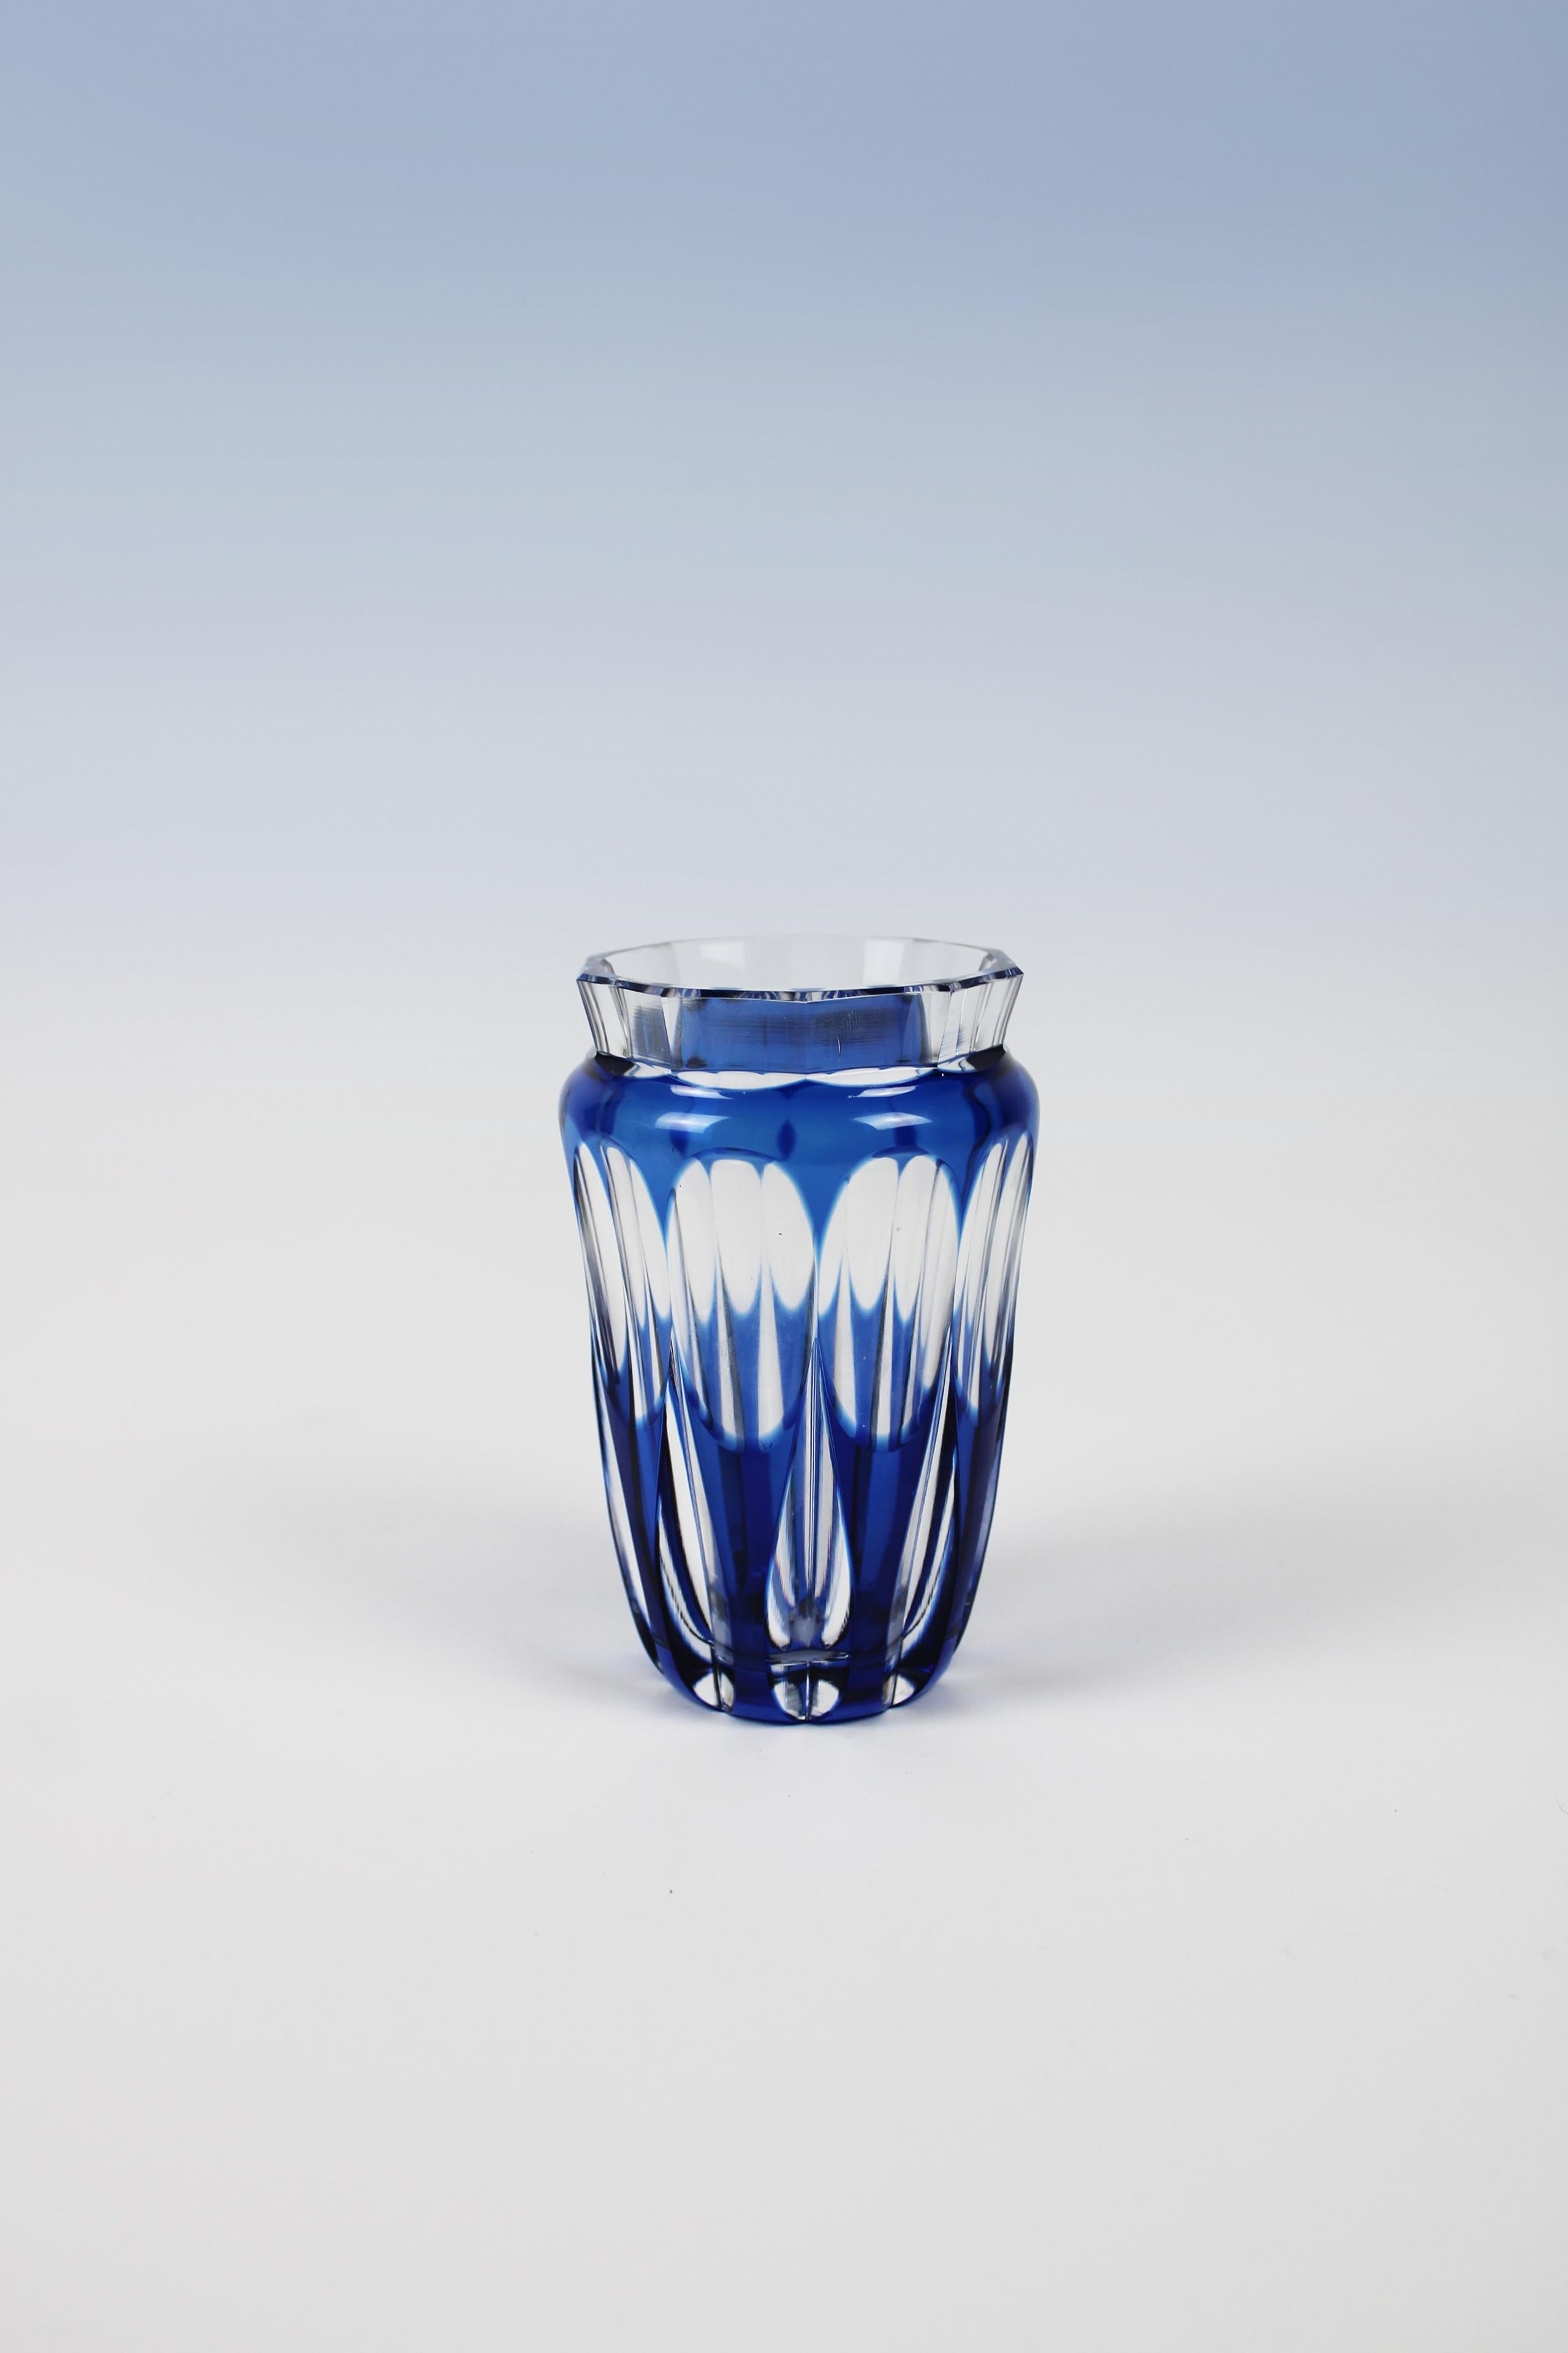 This original and adorable vase by Val St. Lambert, a Belgian manufacture known for their glassware, also shows with this blue vase that it is worth the name. The cute shape curved short with a relief that varies between the blue and transparent